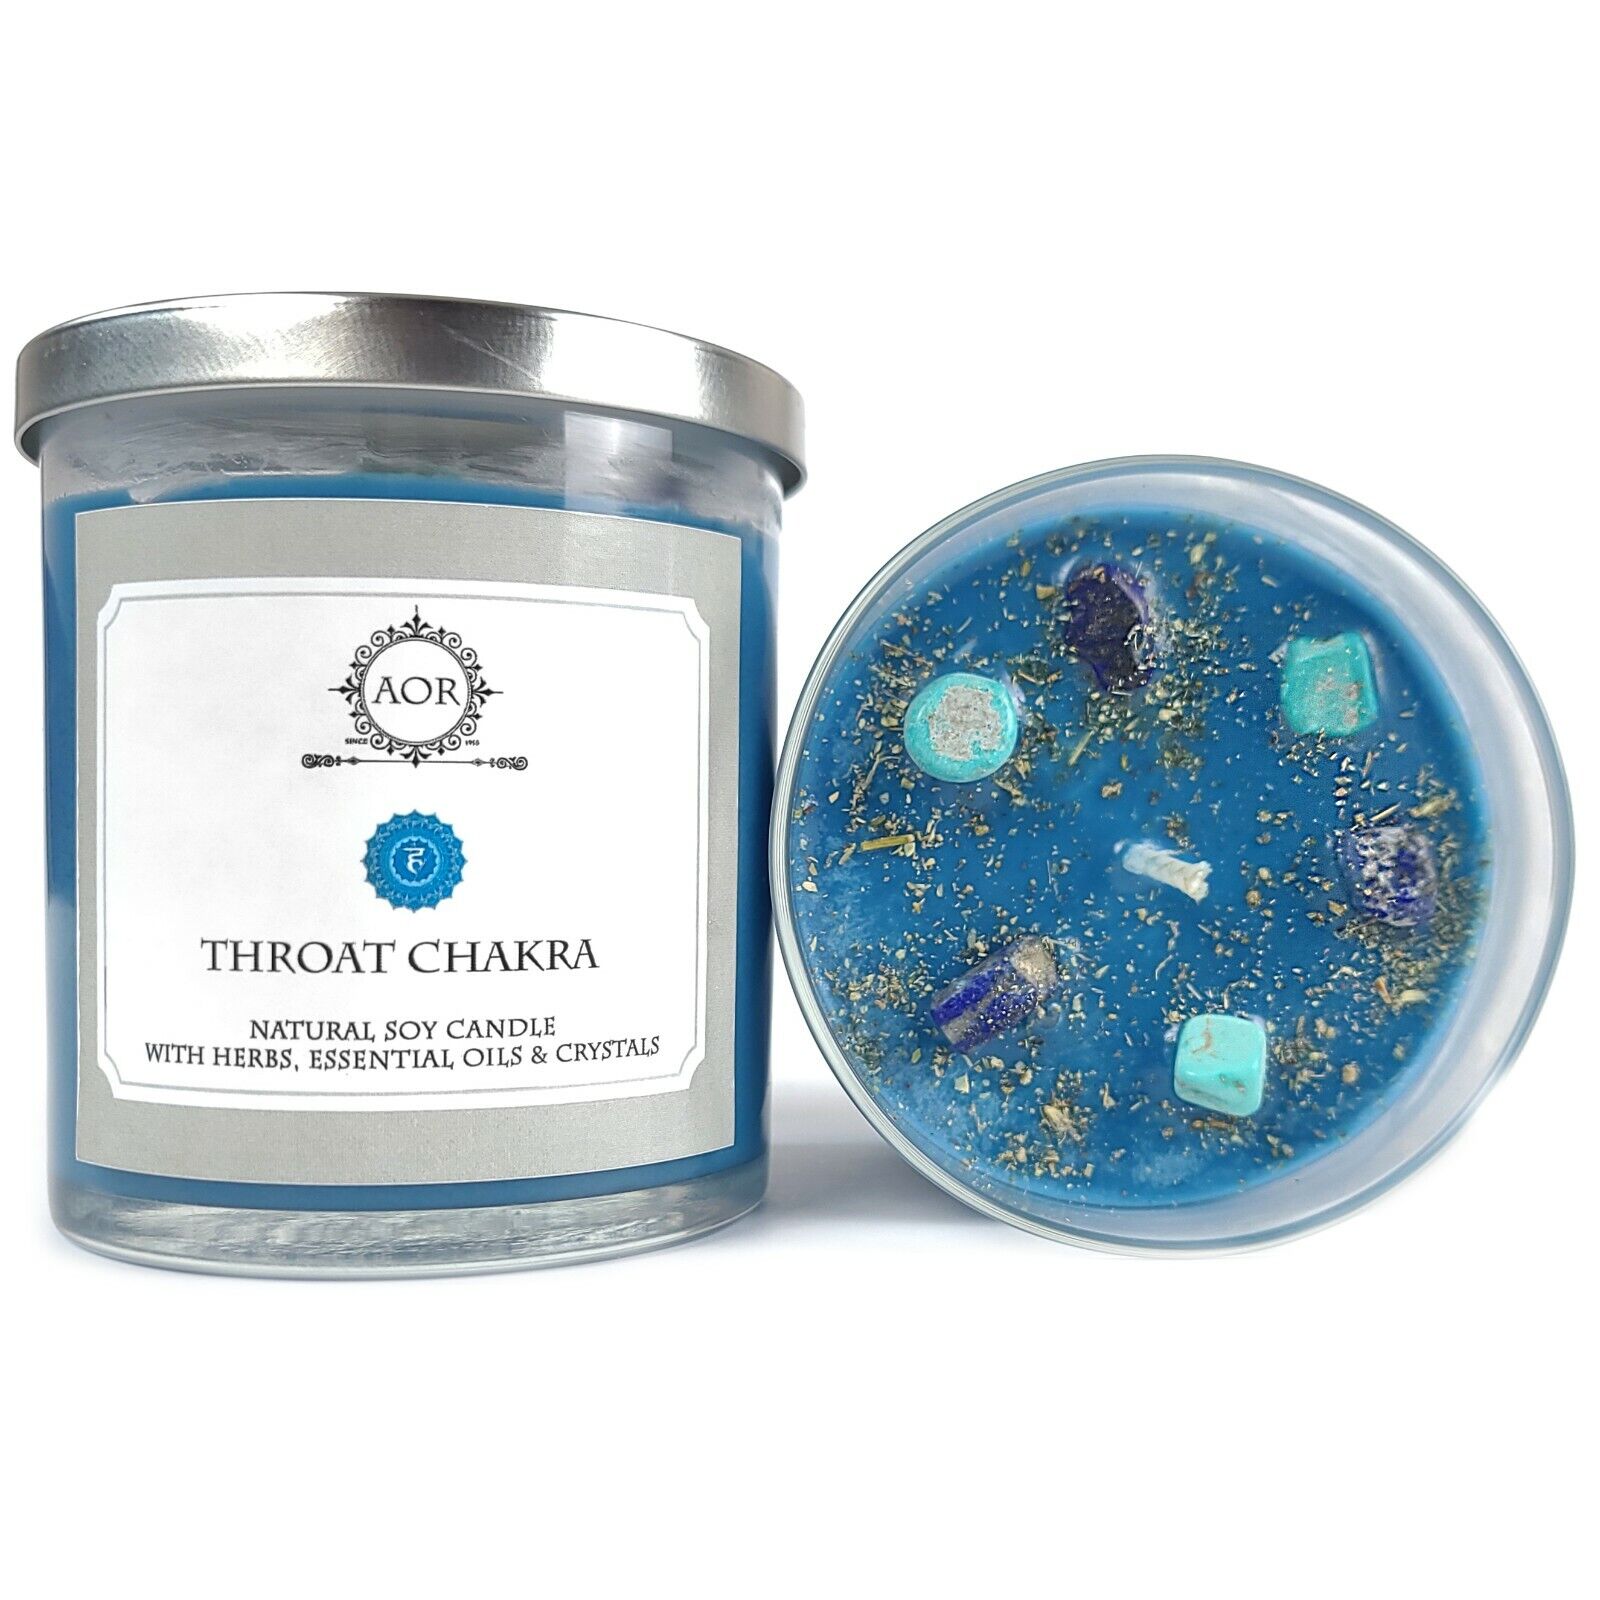 Throat Chakra Soy Candle w/ Crystals & Herbs Spirituality Yoga Wiccan Pagan 